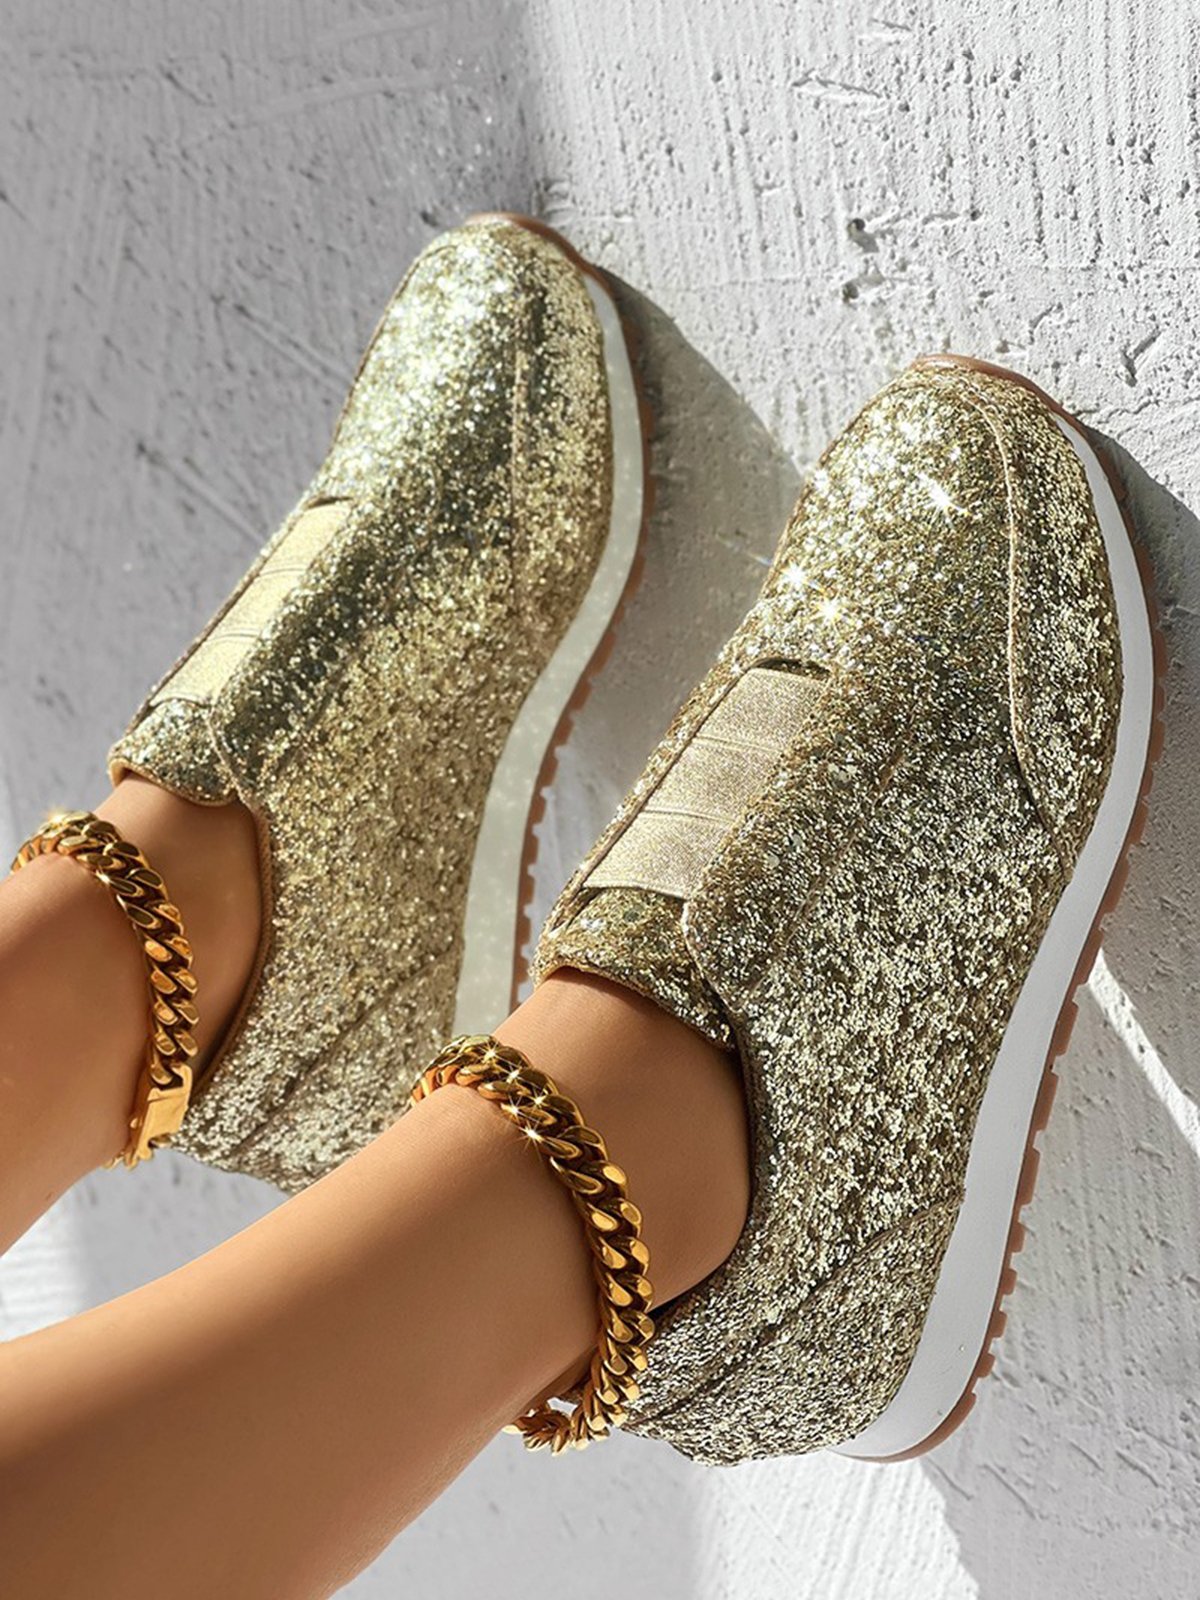 Sparkling Gillter Elasticated Slip On Fashion Sneakers